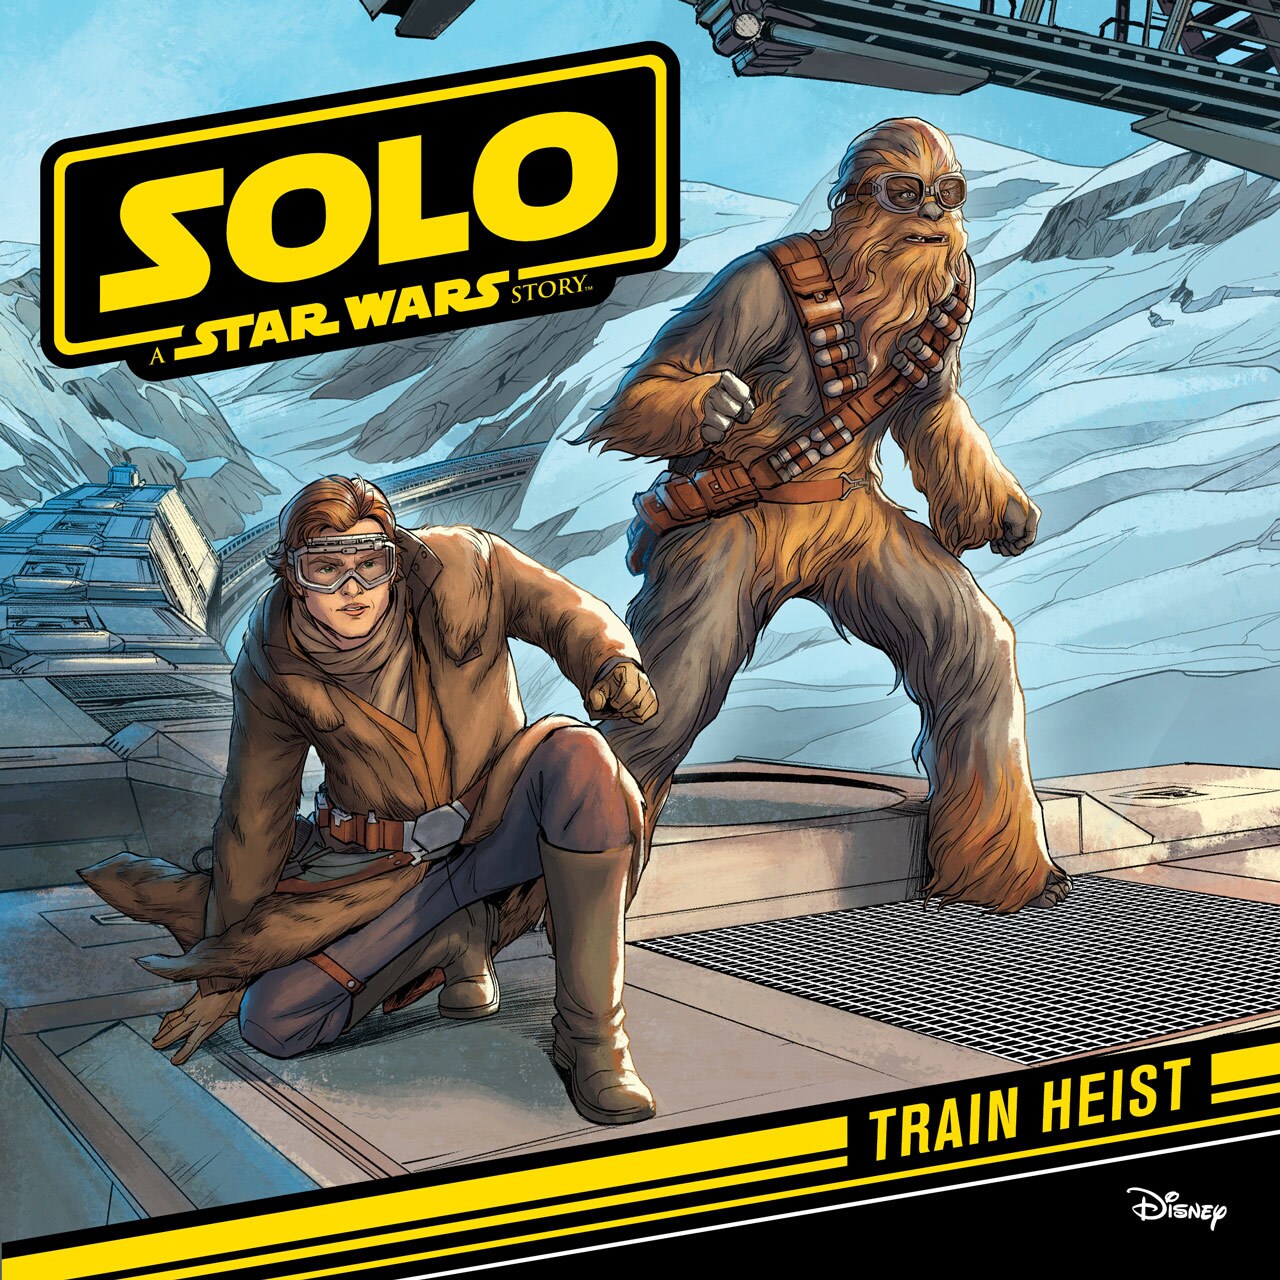 Solo: A Star Wars Story: Train Heist book cover, which features Han and Chewbacca on top of a moving train.